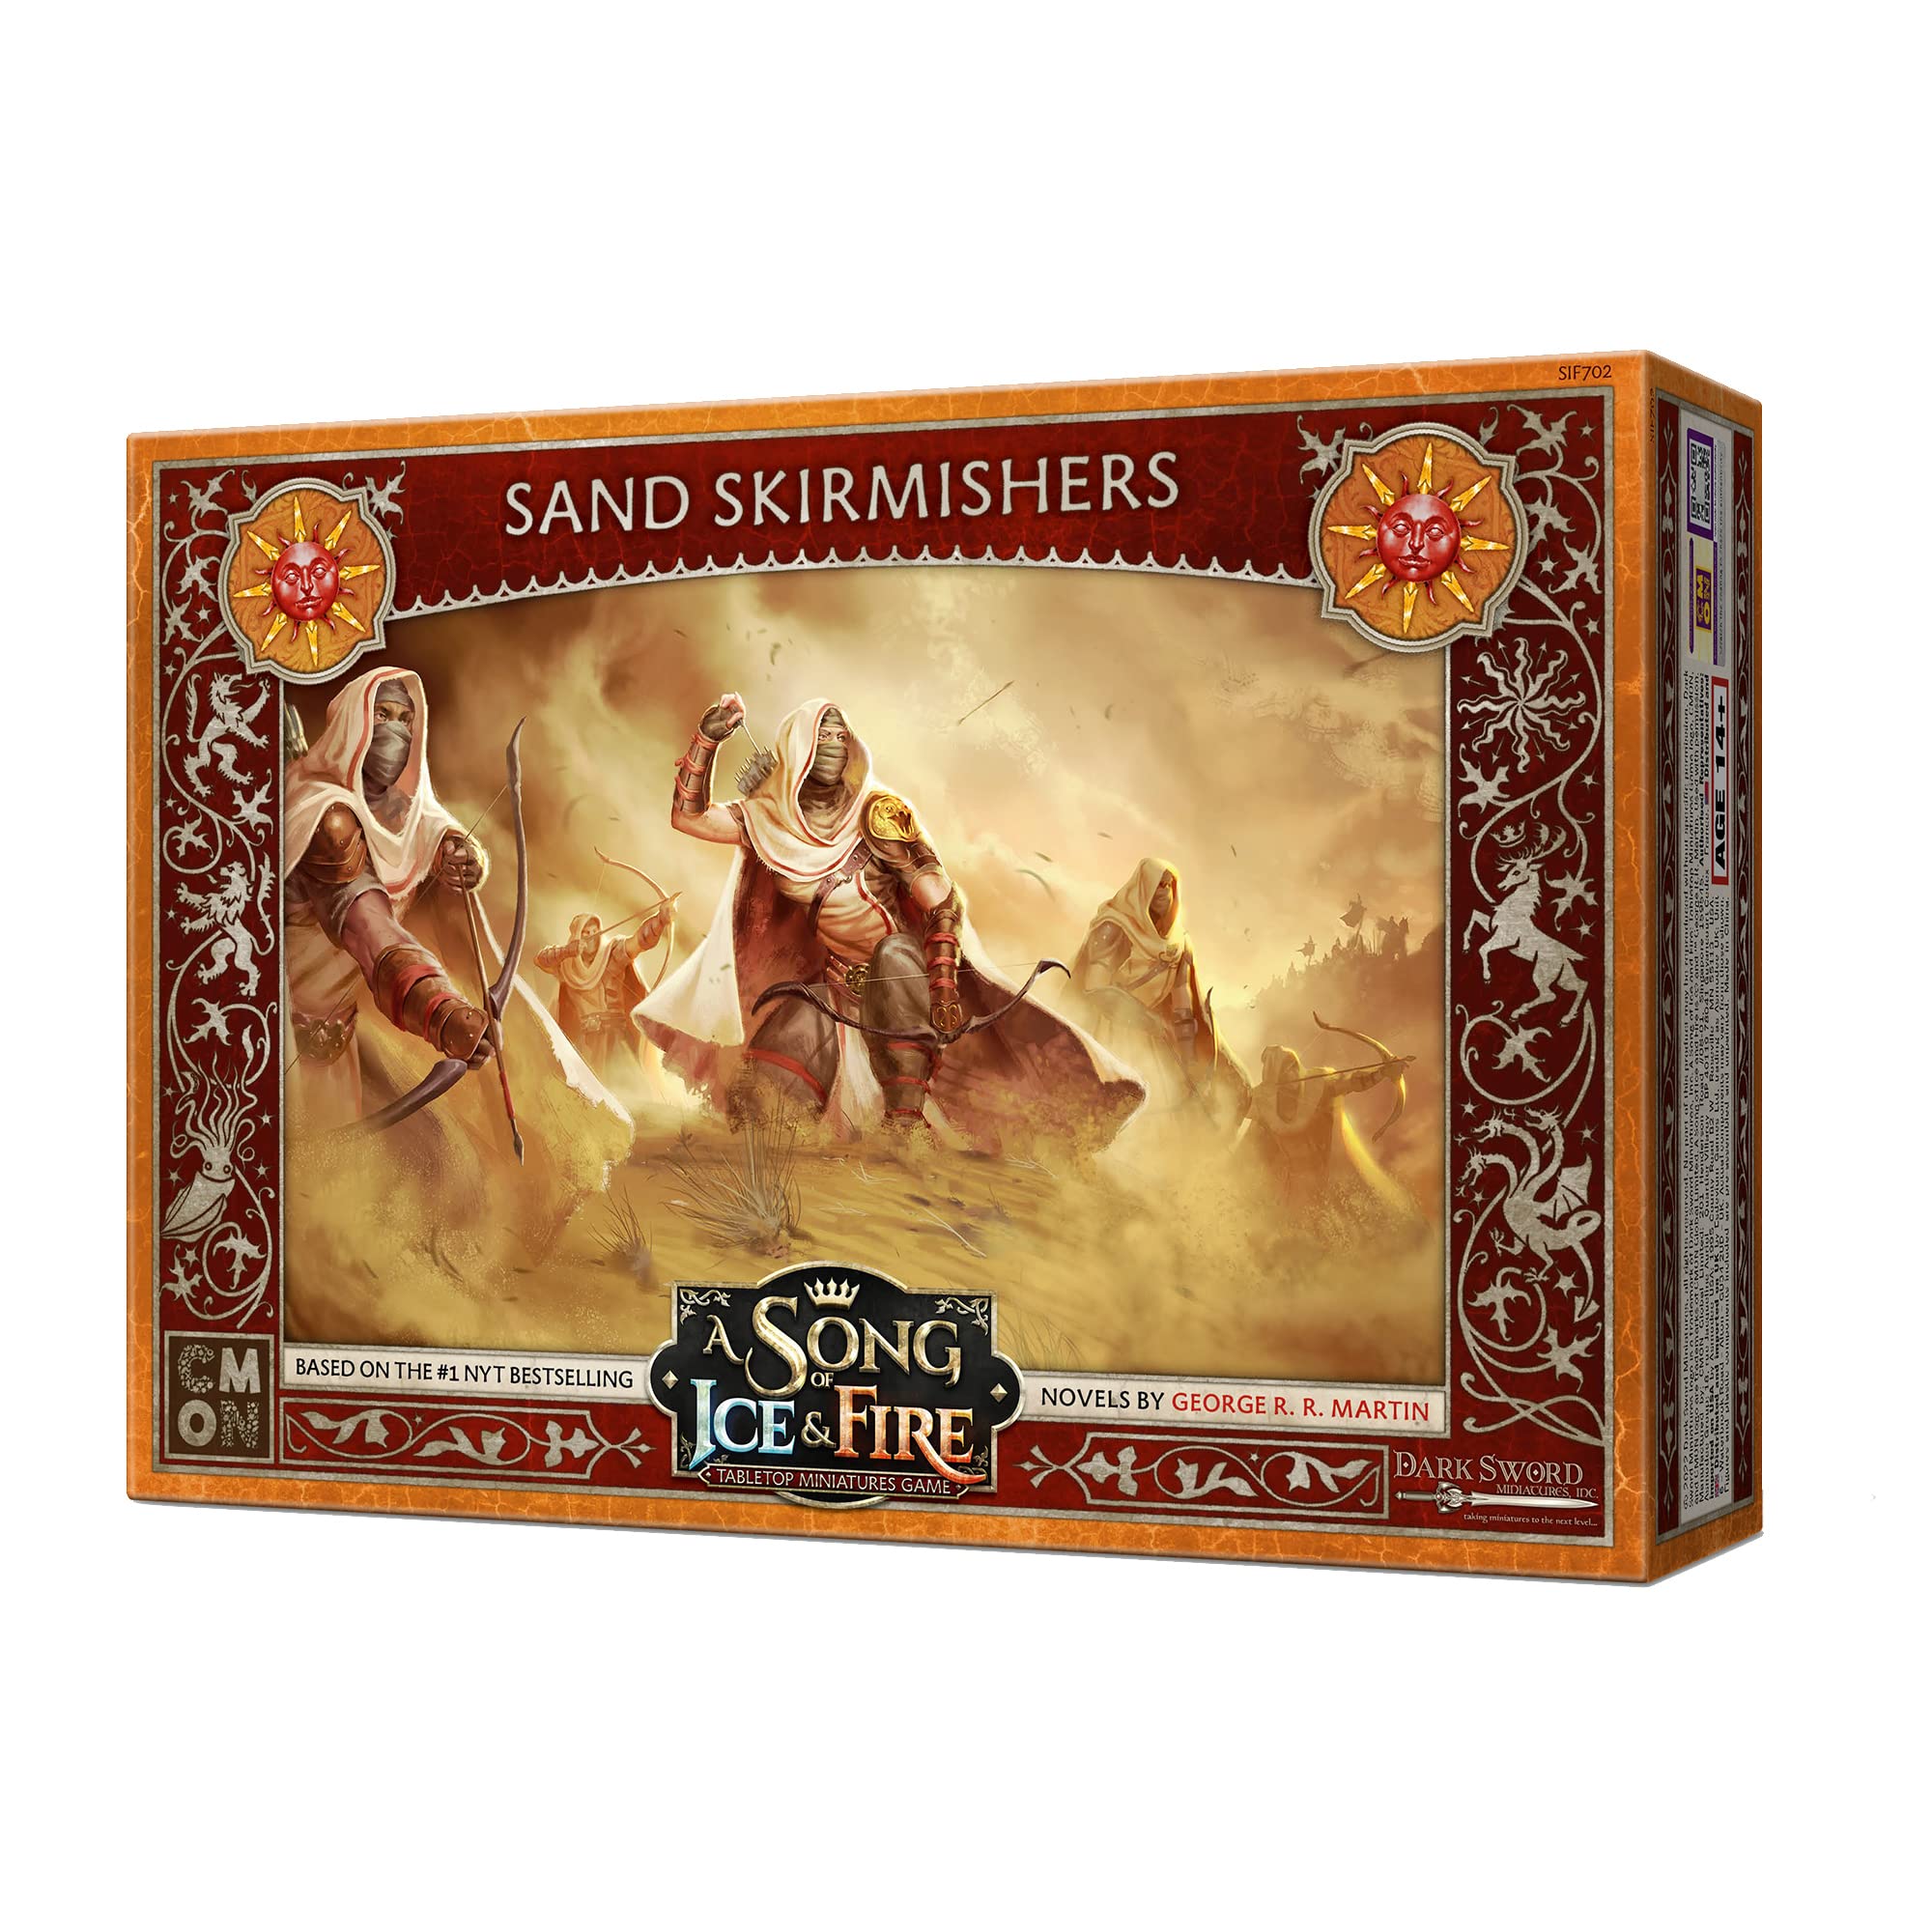 A Song of Ice and Fire Tabletop Miniatures Game Sand Skirmishers Unit Box - Elite Warriors of The Dorne, Strategy Game for Adults, Ages 14+, 2+ Players, 45-60 Minute Playtime, Made by CMON